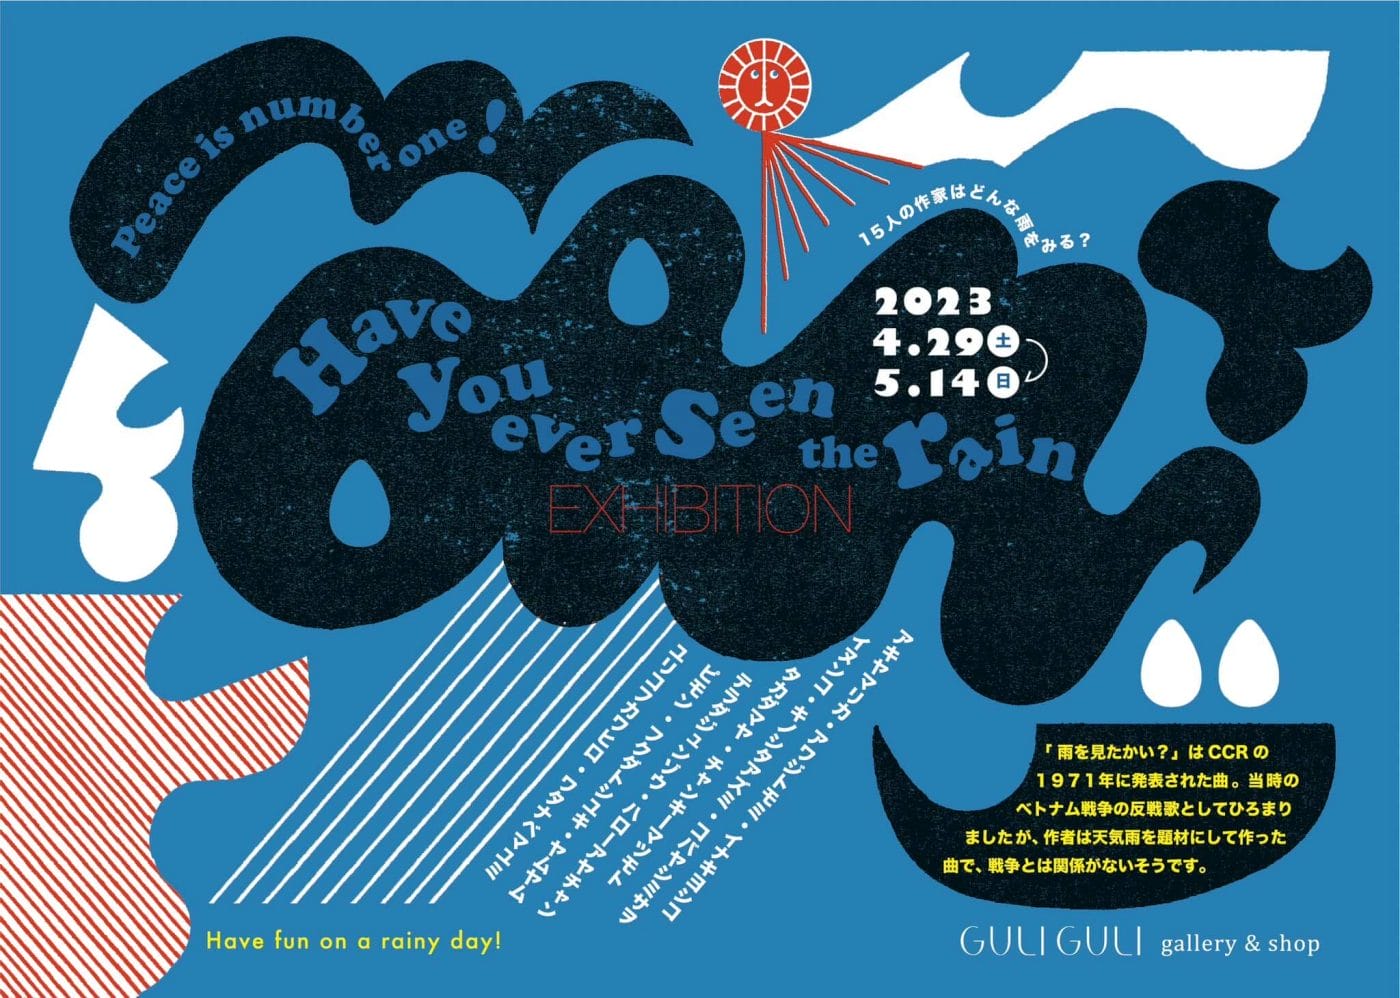 「Have you ever seen the rain EXHIBITION」、GULIGULIにて開催。15人のイラストレーターが「雨」を表現。